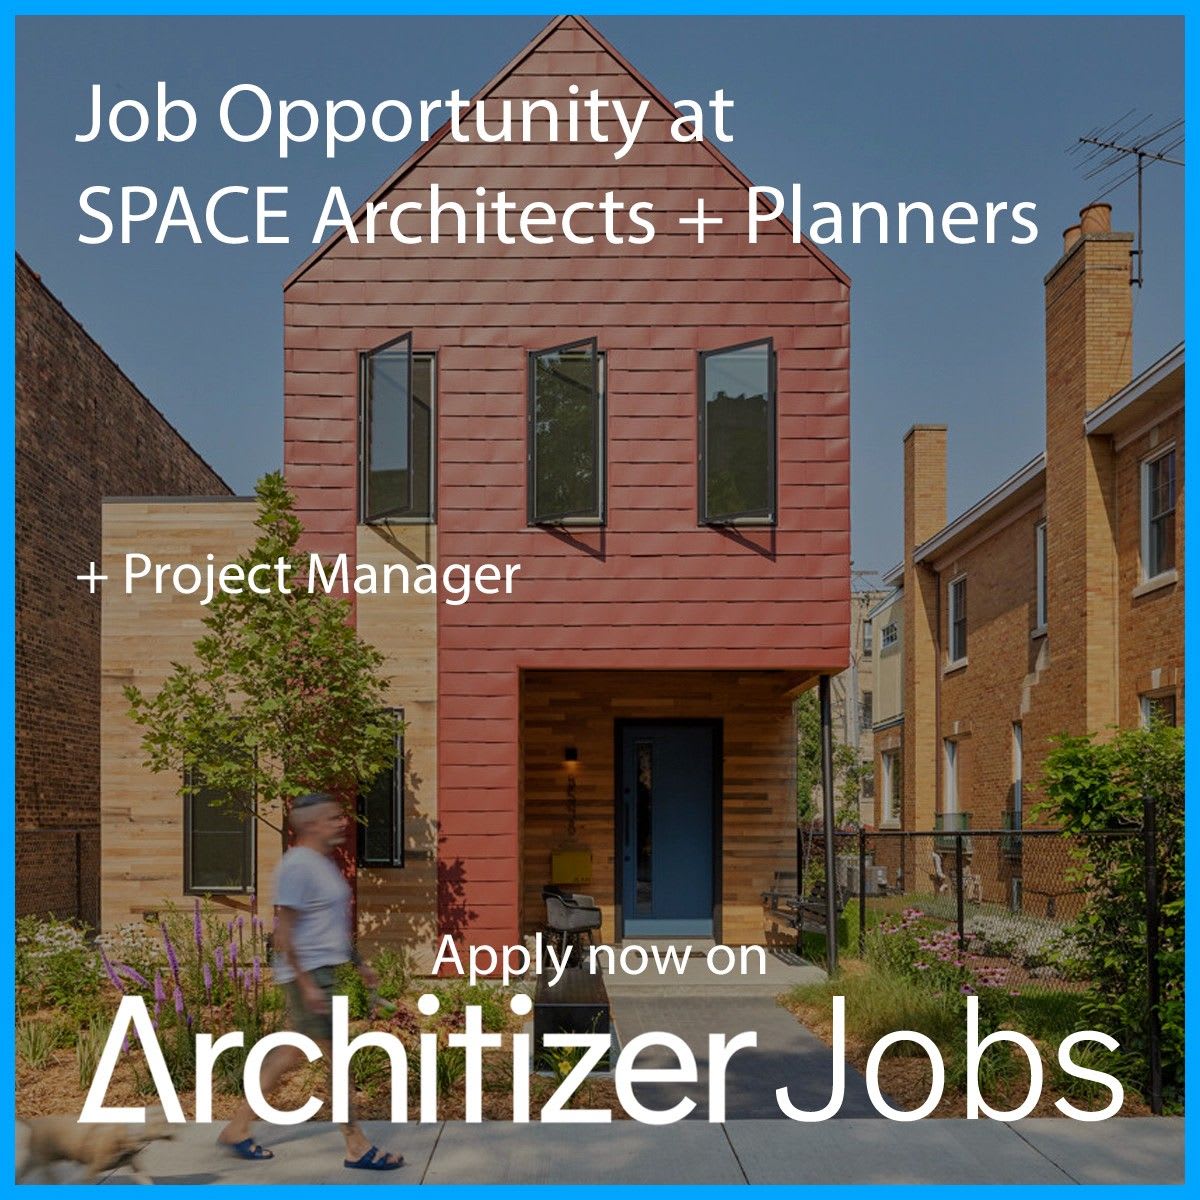 JOB OPPORTUNITY: SPACE Architects + Planners seeks applicants with 3-6 years of experience managing architectural projects and leading teams on single-family and multi-unit residential projects (new construction and adaptive reuse). READ MORE & APPLY: